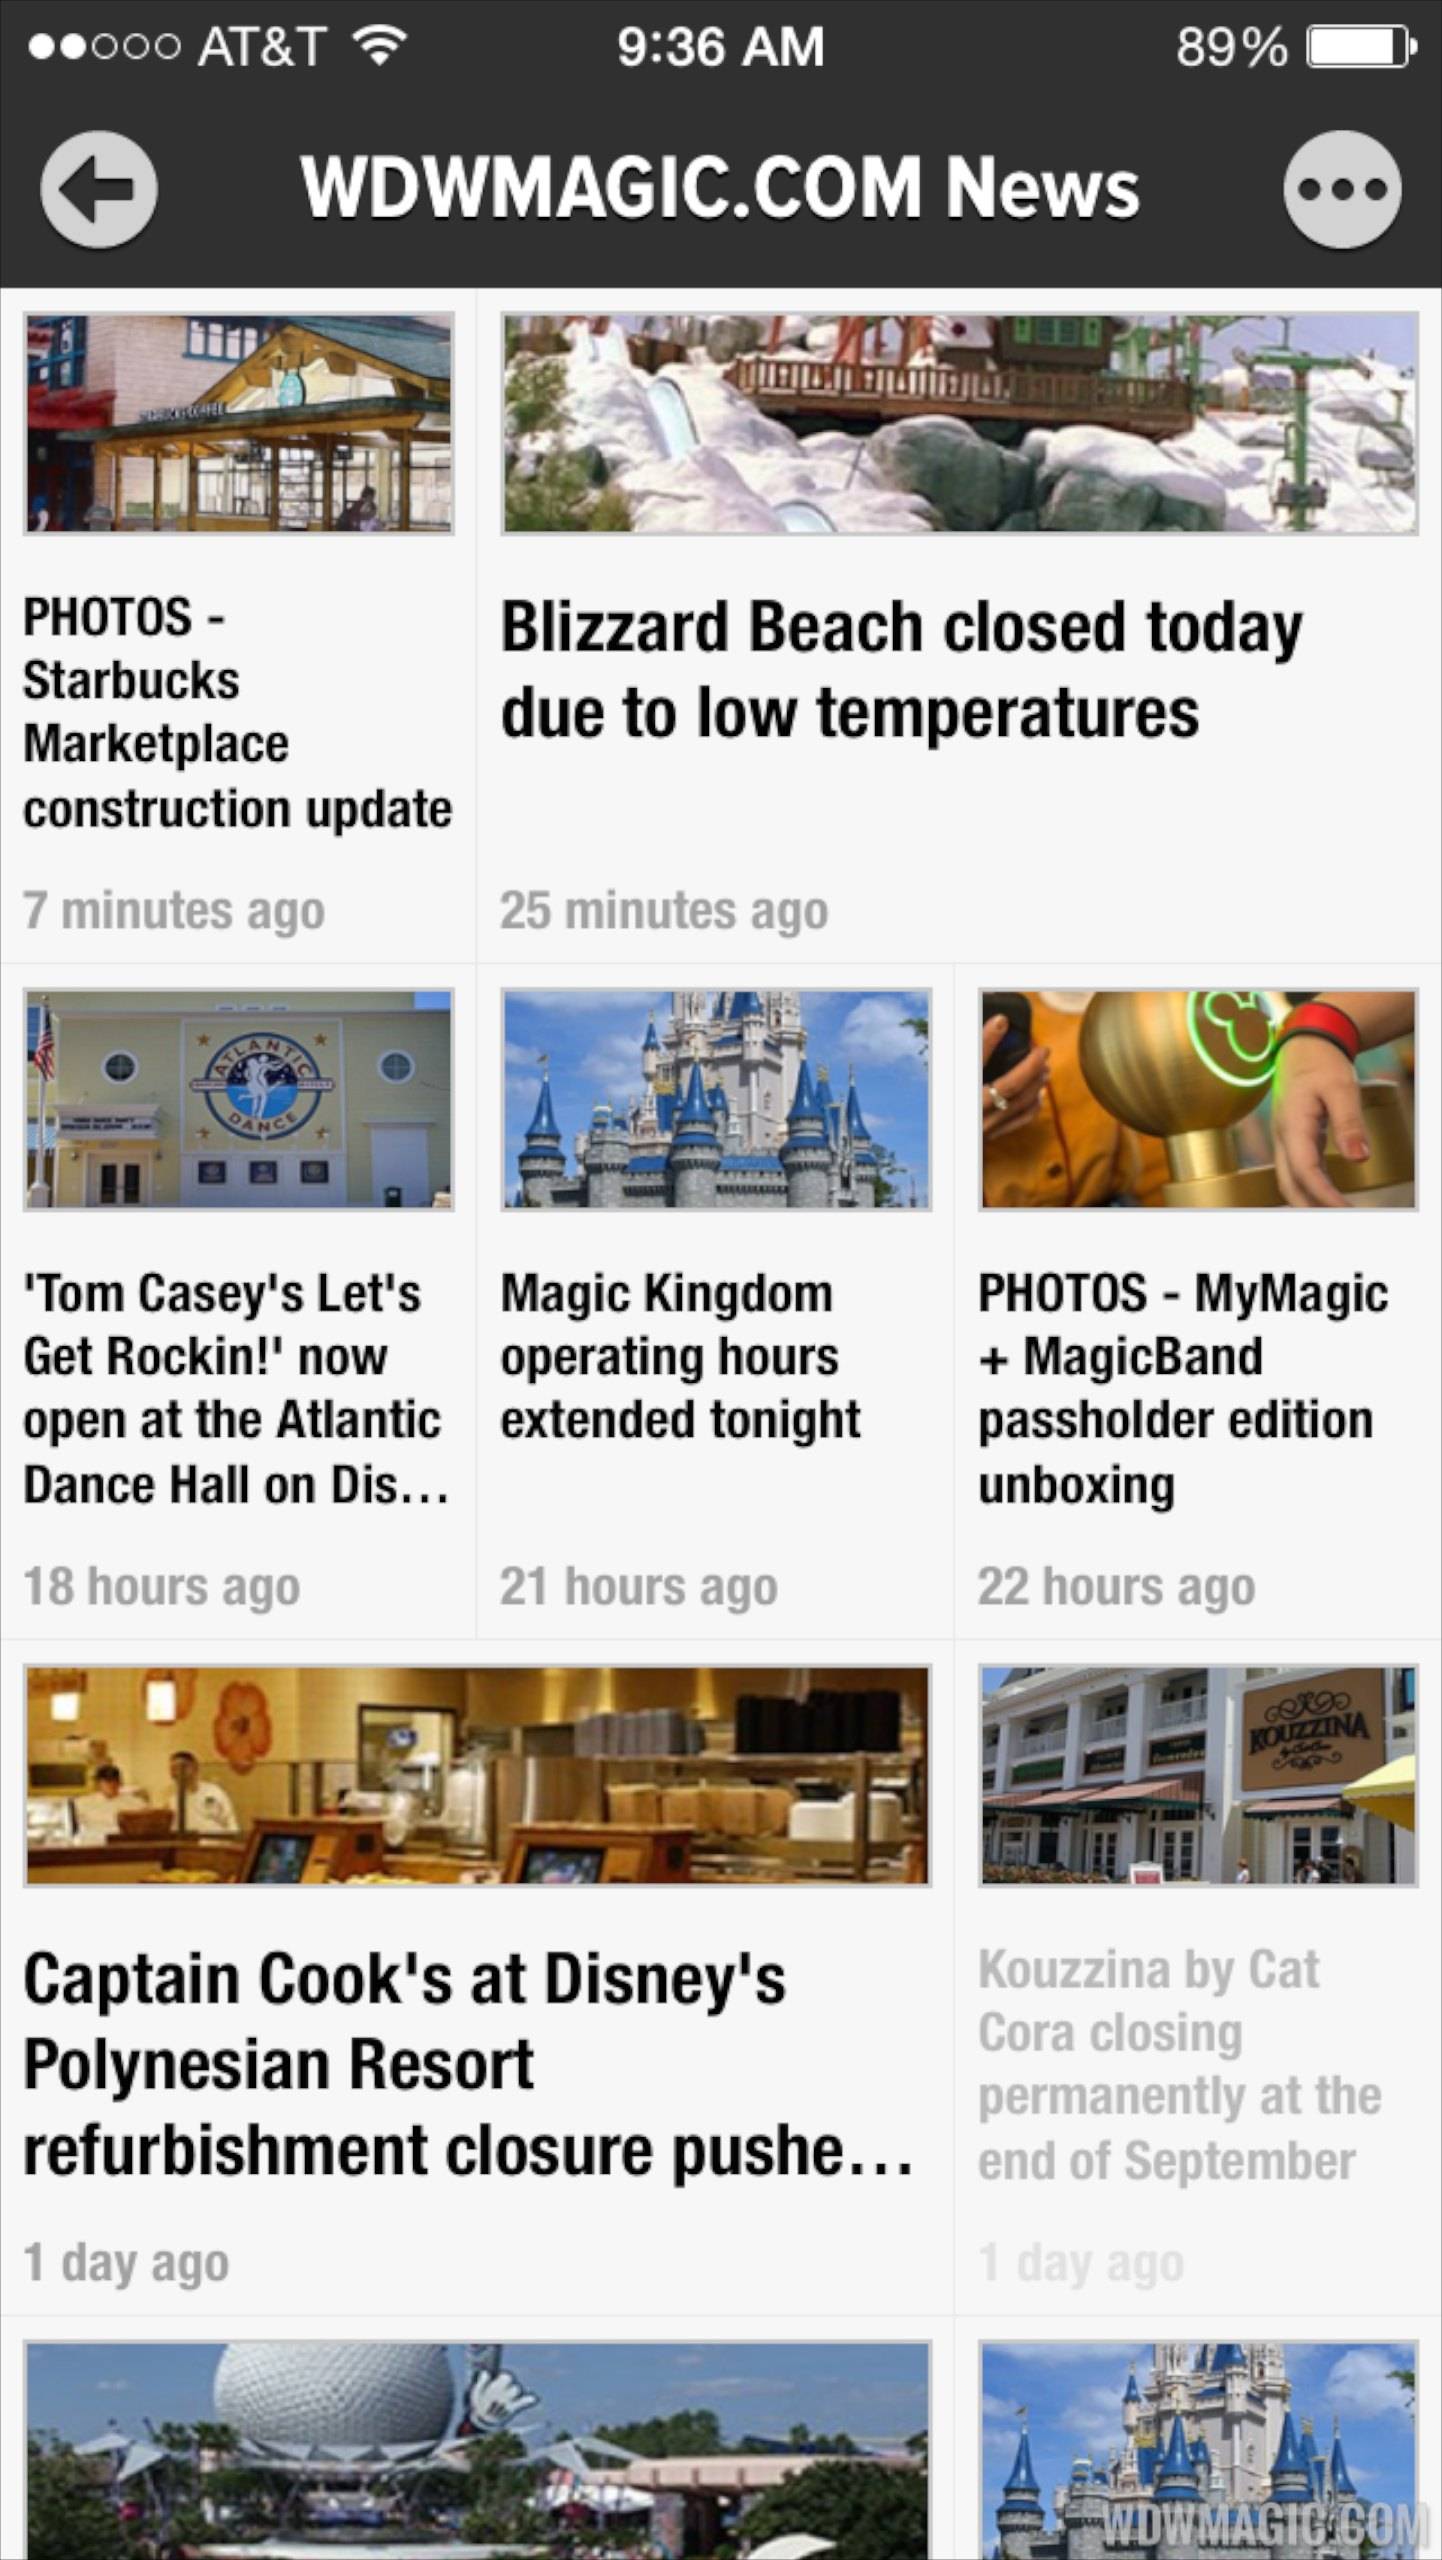 NEW - WDWMAGIC news headlines now available via RSS for Feedly and all RSS readers